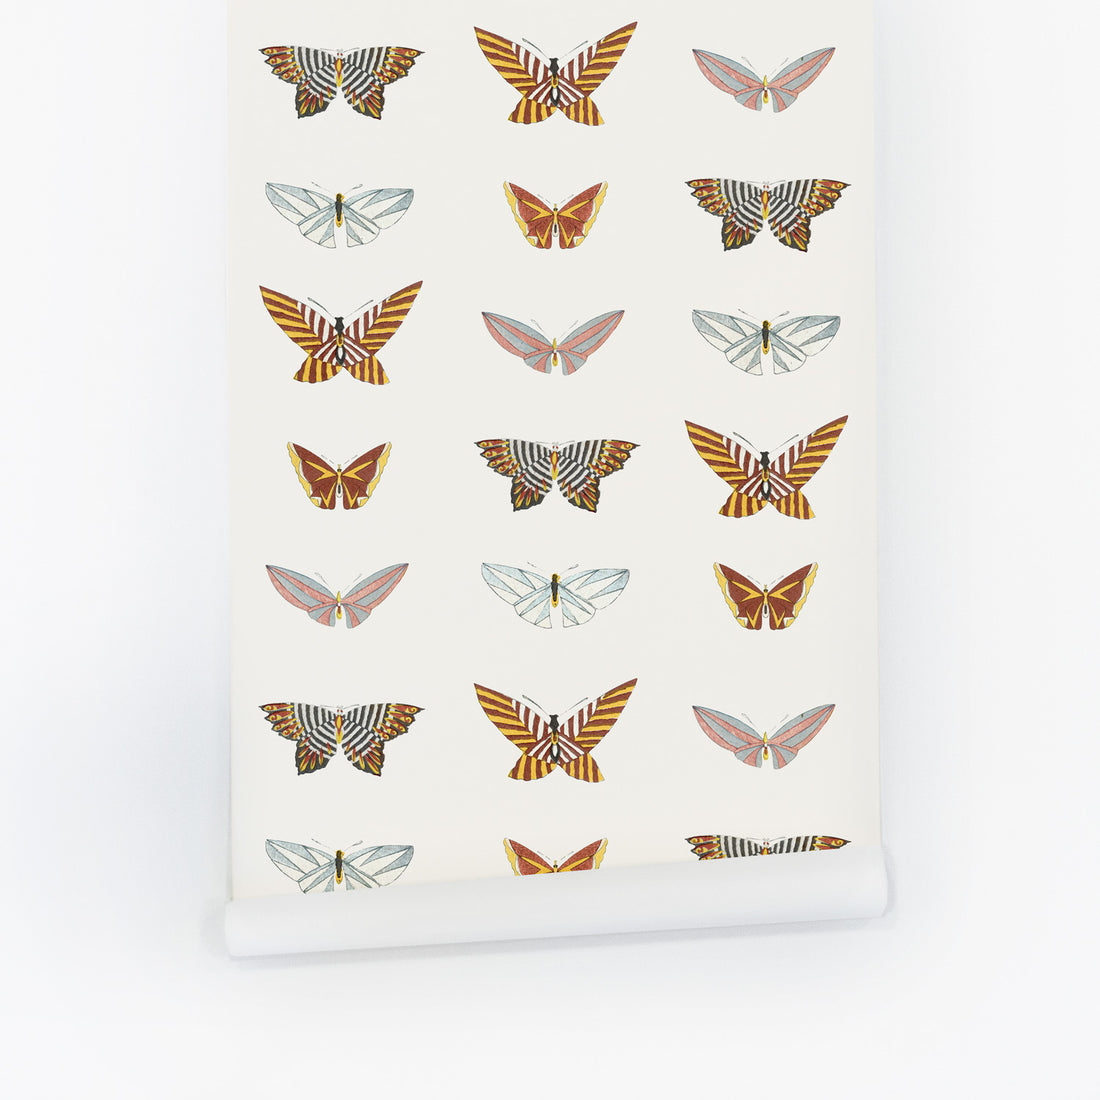 Vintage design butterfly wallpaper with graphic pattern wings and off white background